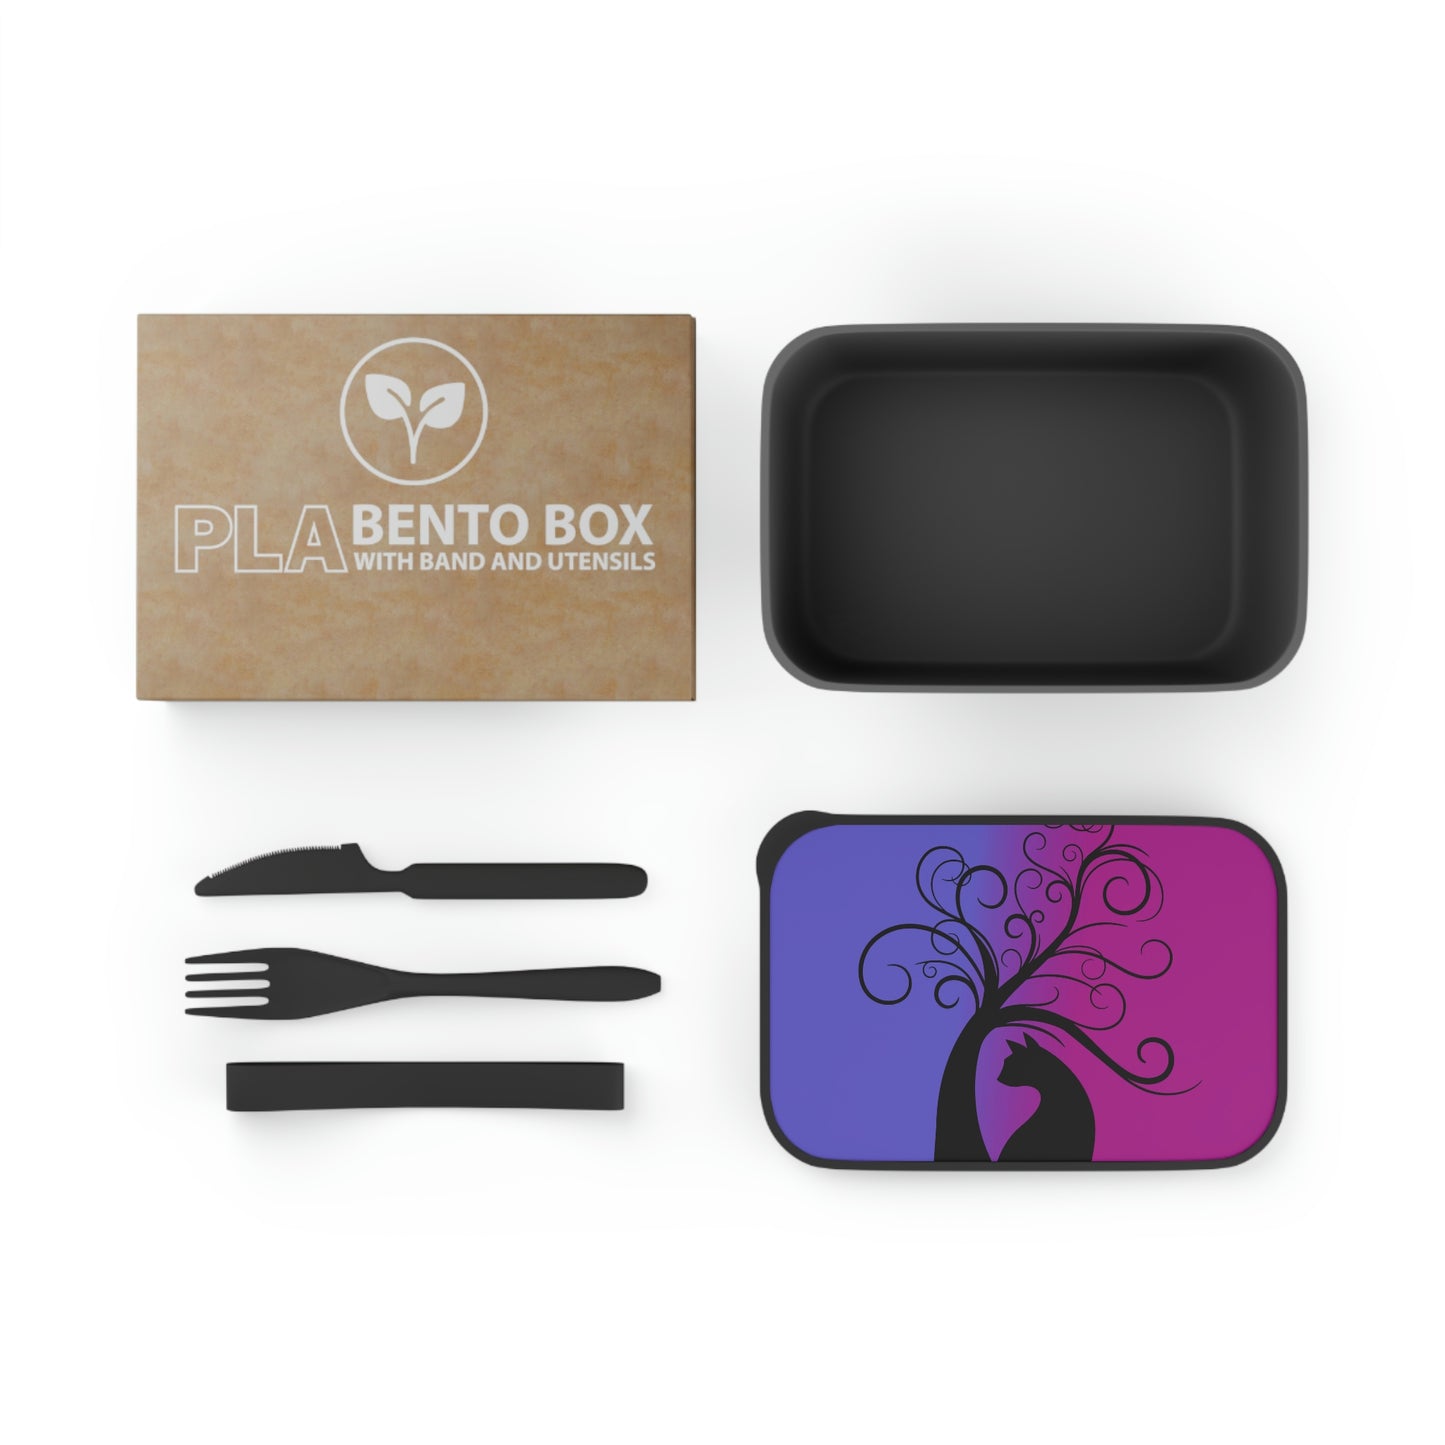 Magical black cat PLA Bento Box with Band and Utensils